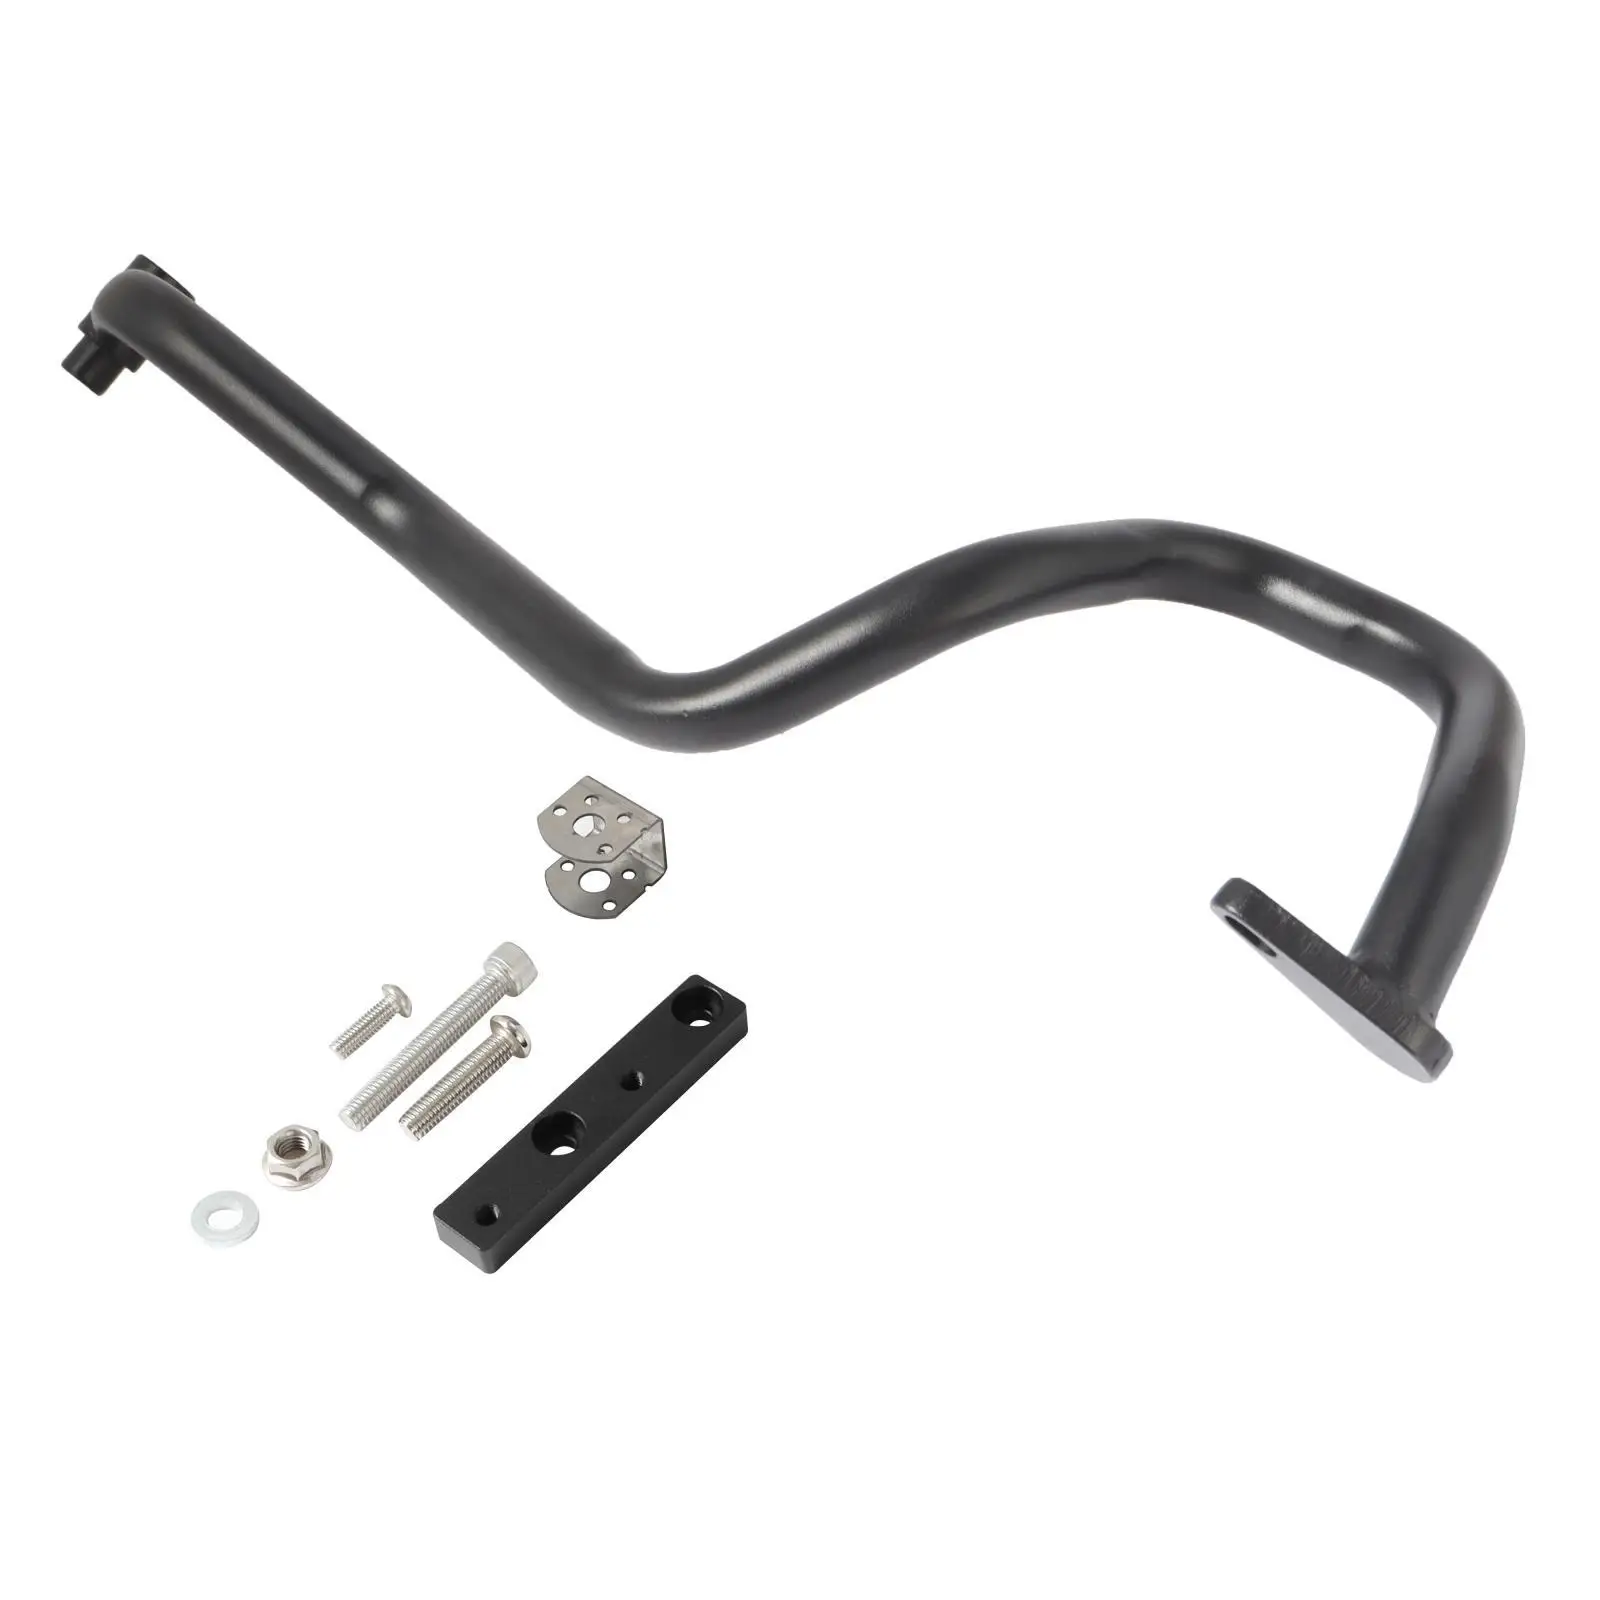 Exhaust Pipe Guard Bumper Accessories Fits for PA 1250 S